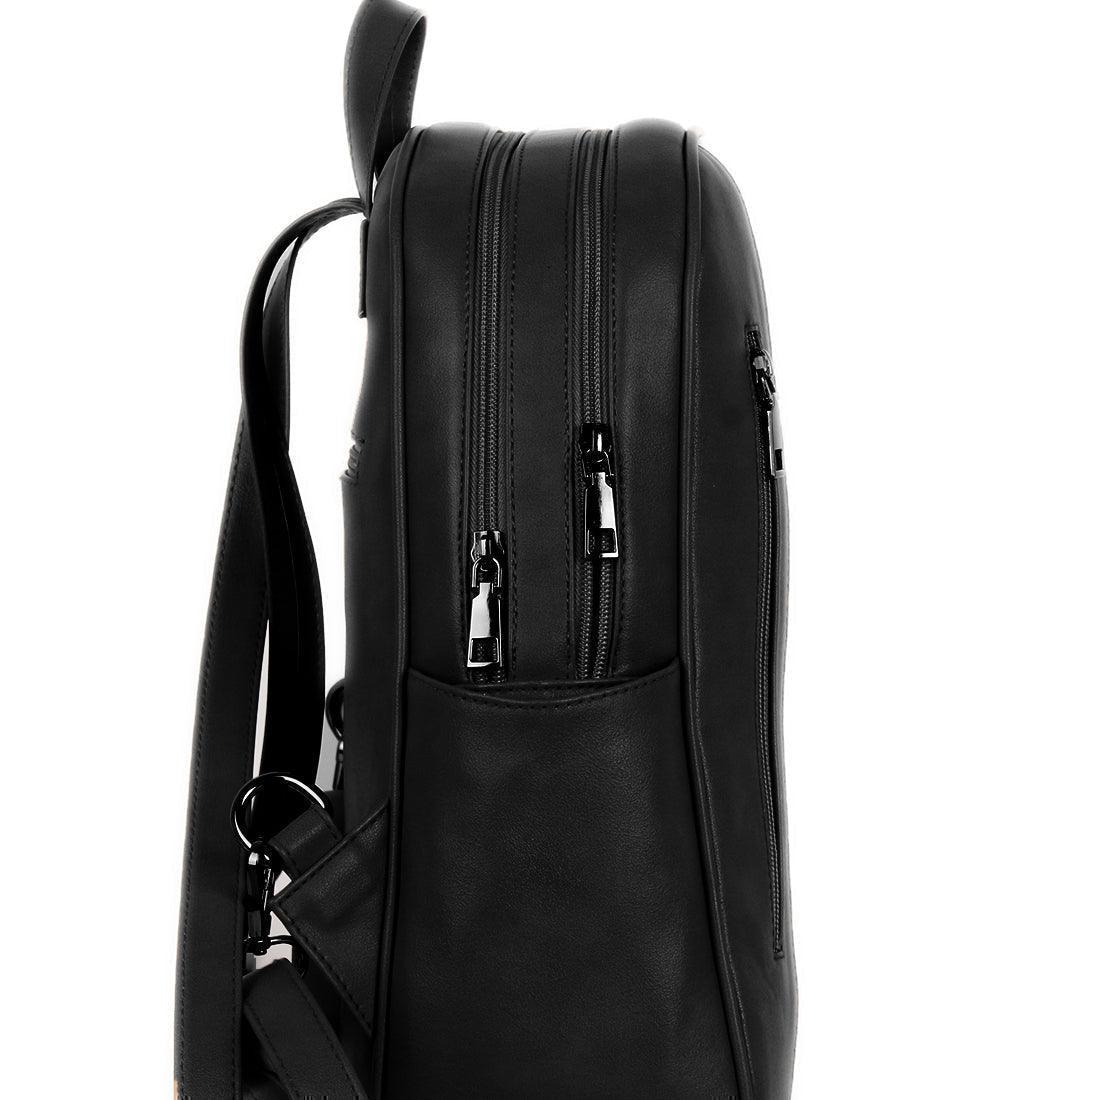 Black Mixed Backpack Space - CANVAEGYPT